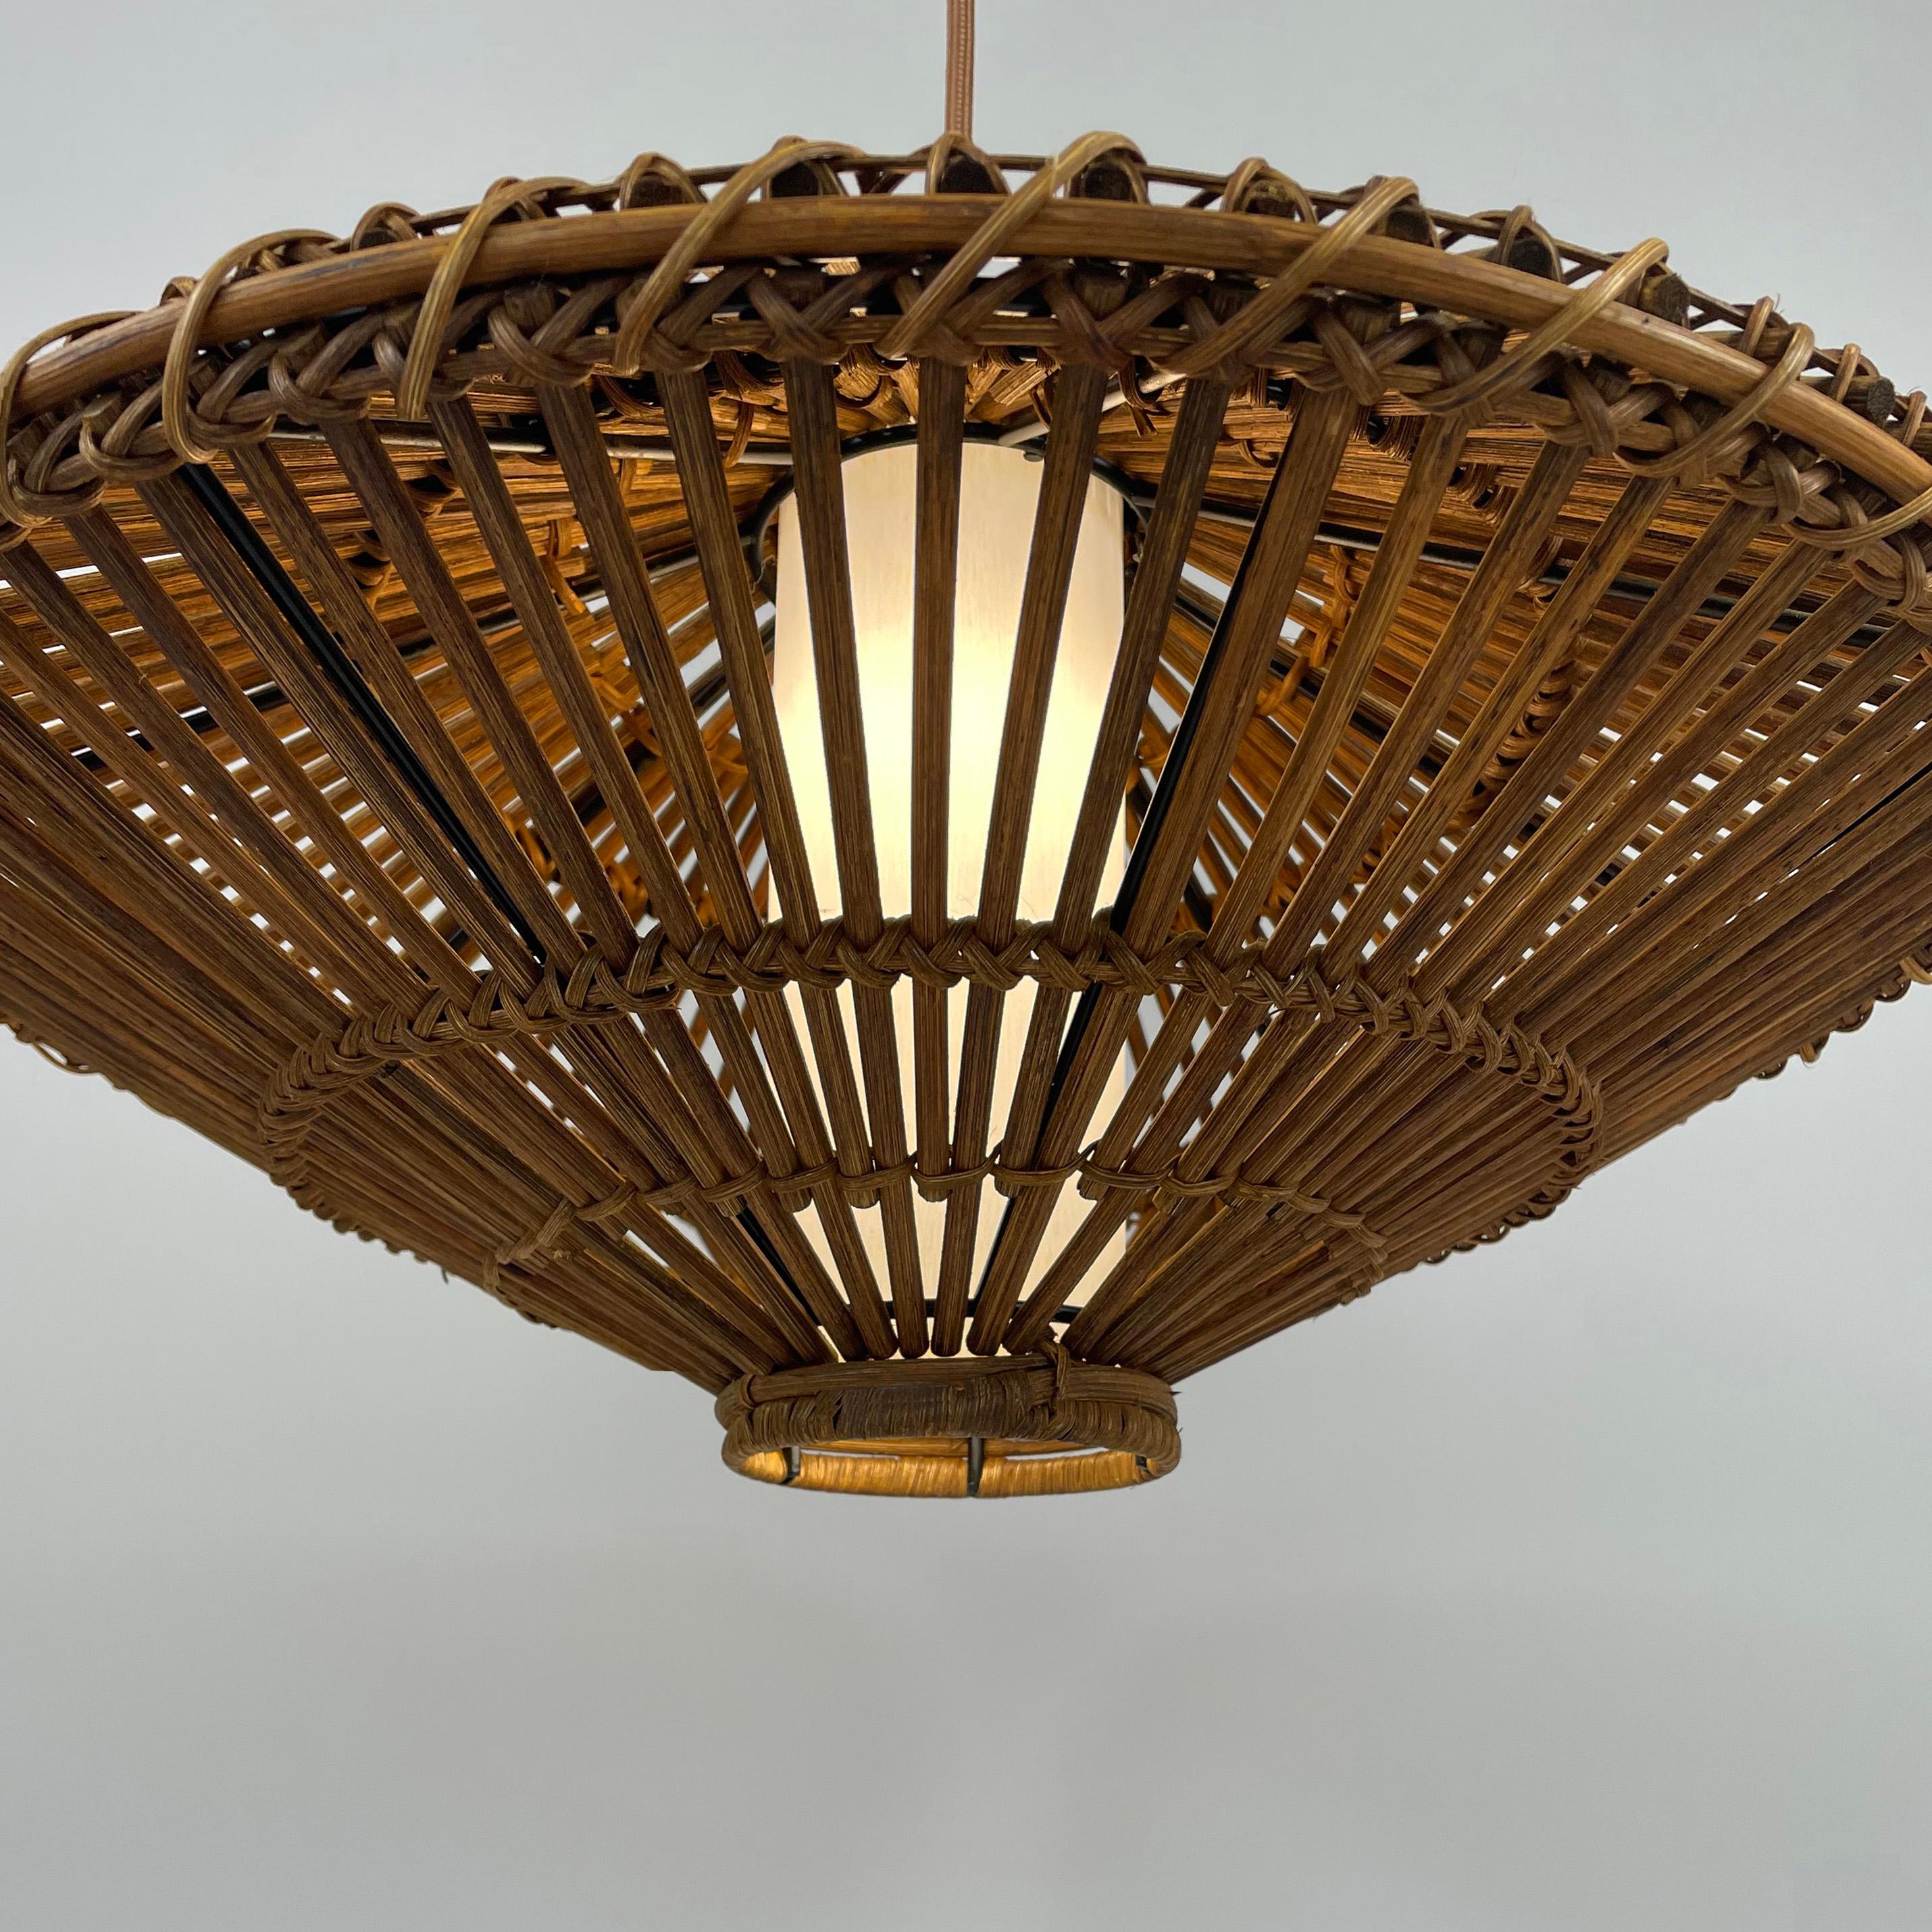 Midcentury French Rattan Wicker Pendant, 1960s For Sale 5